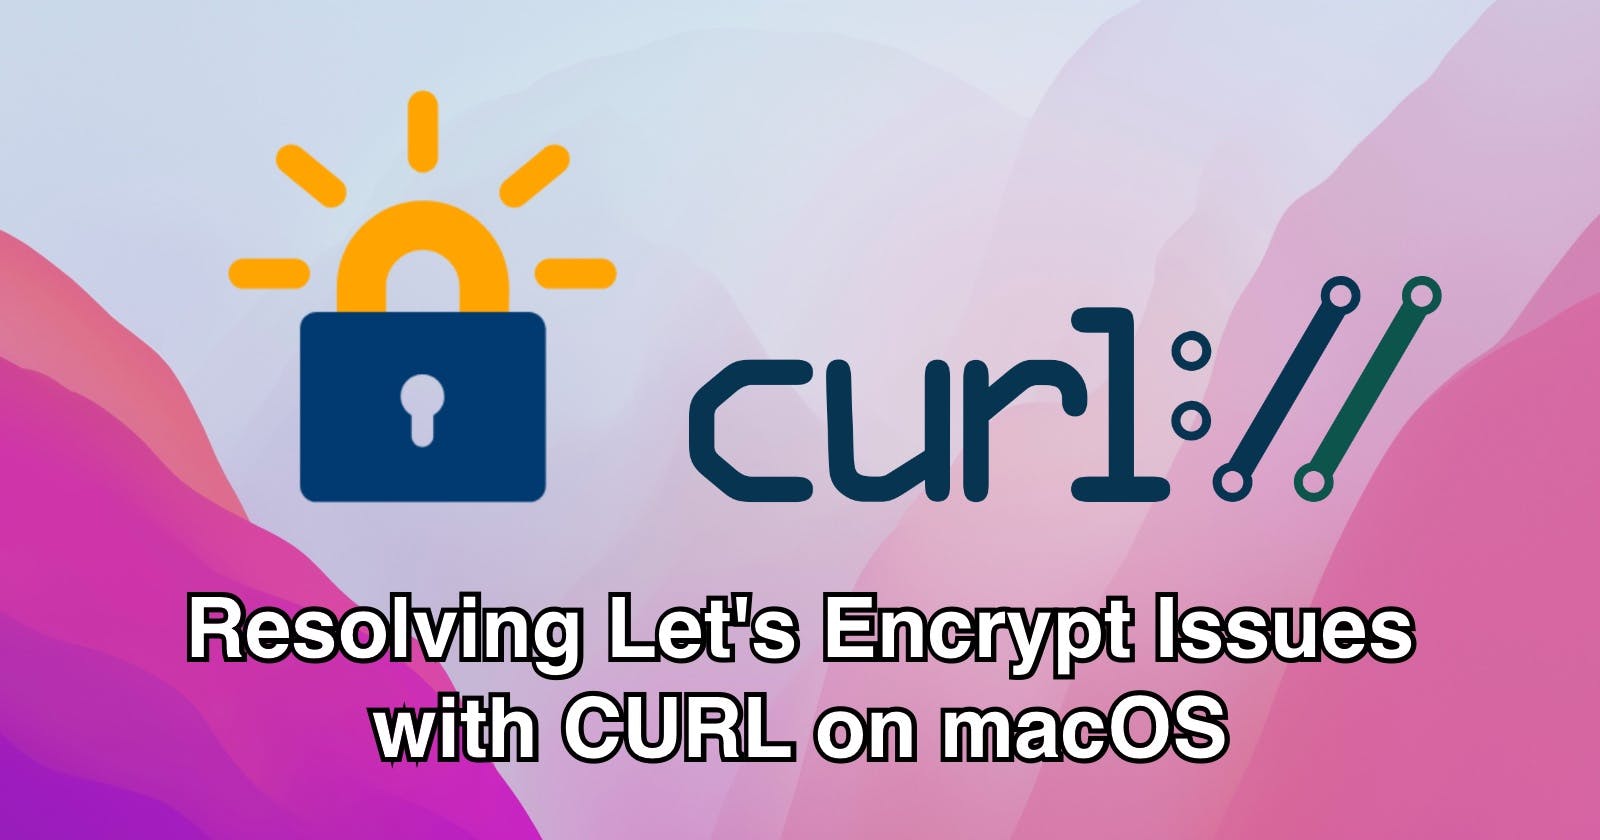 Resolving Let's Encrypt Issues with CURL on macOS